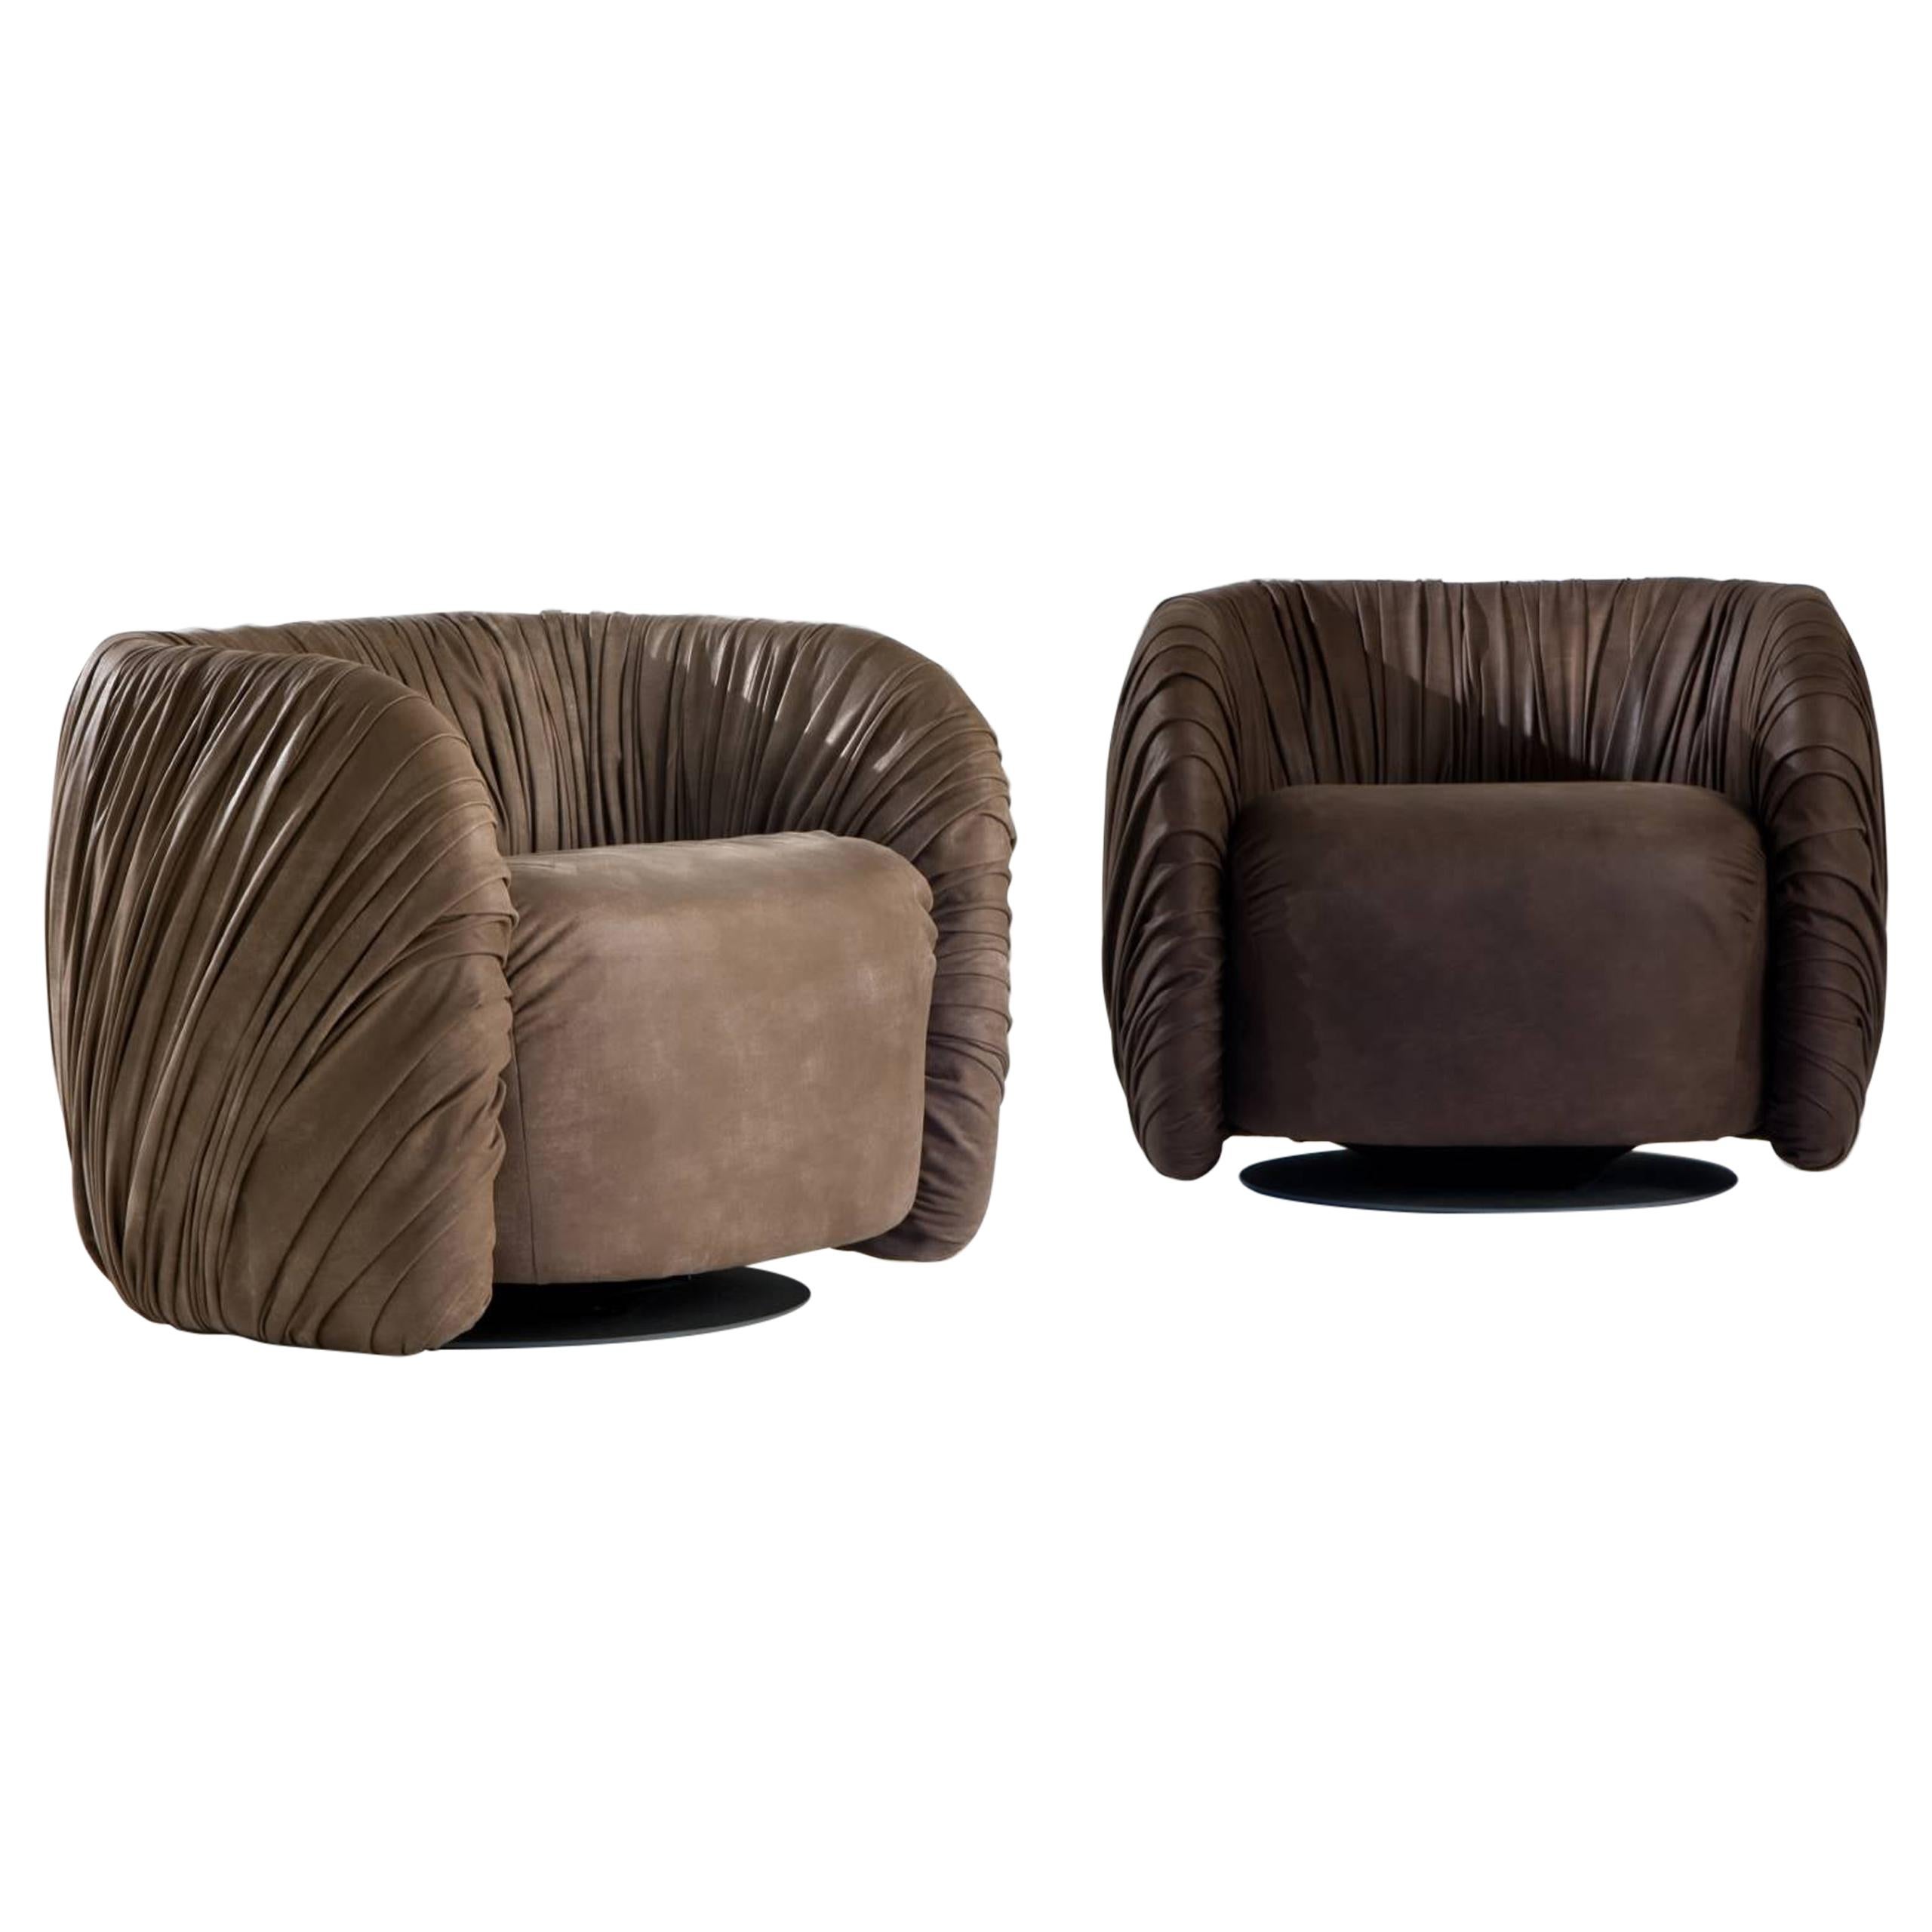 Laurameroni "Drapè Lounge" Modern Swivel Armchair in Hand-Pleated Leather For Sale